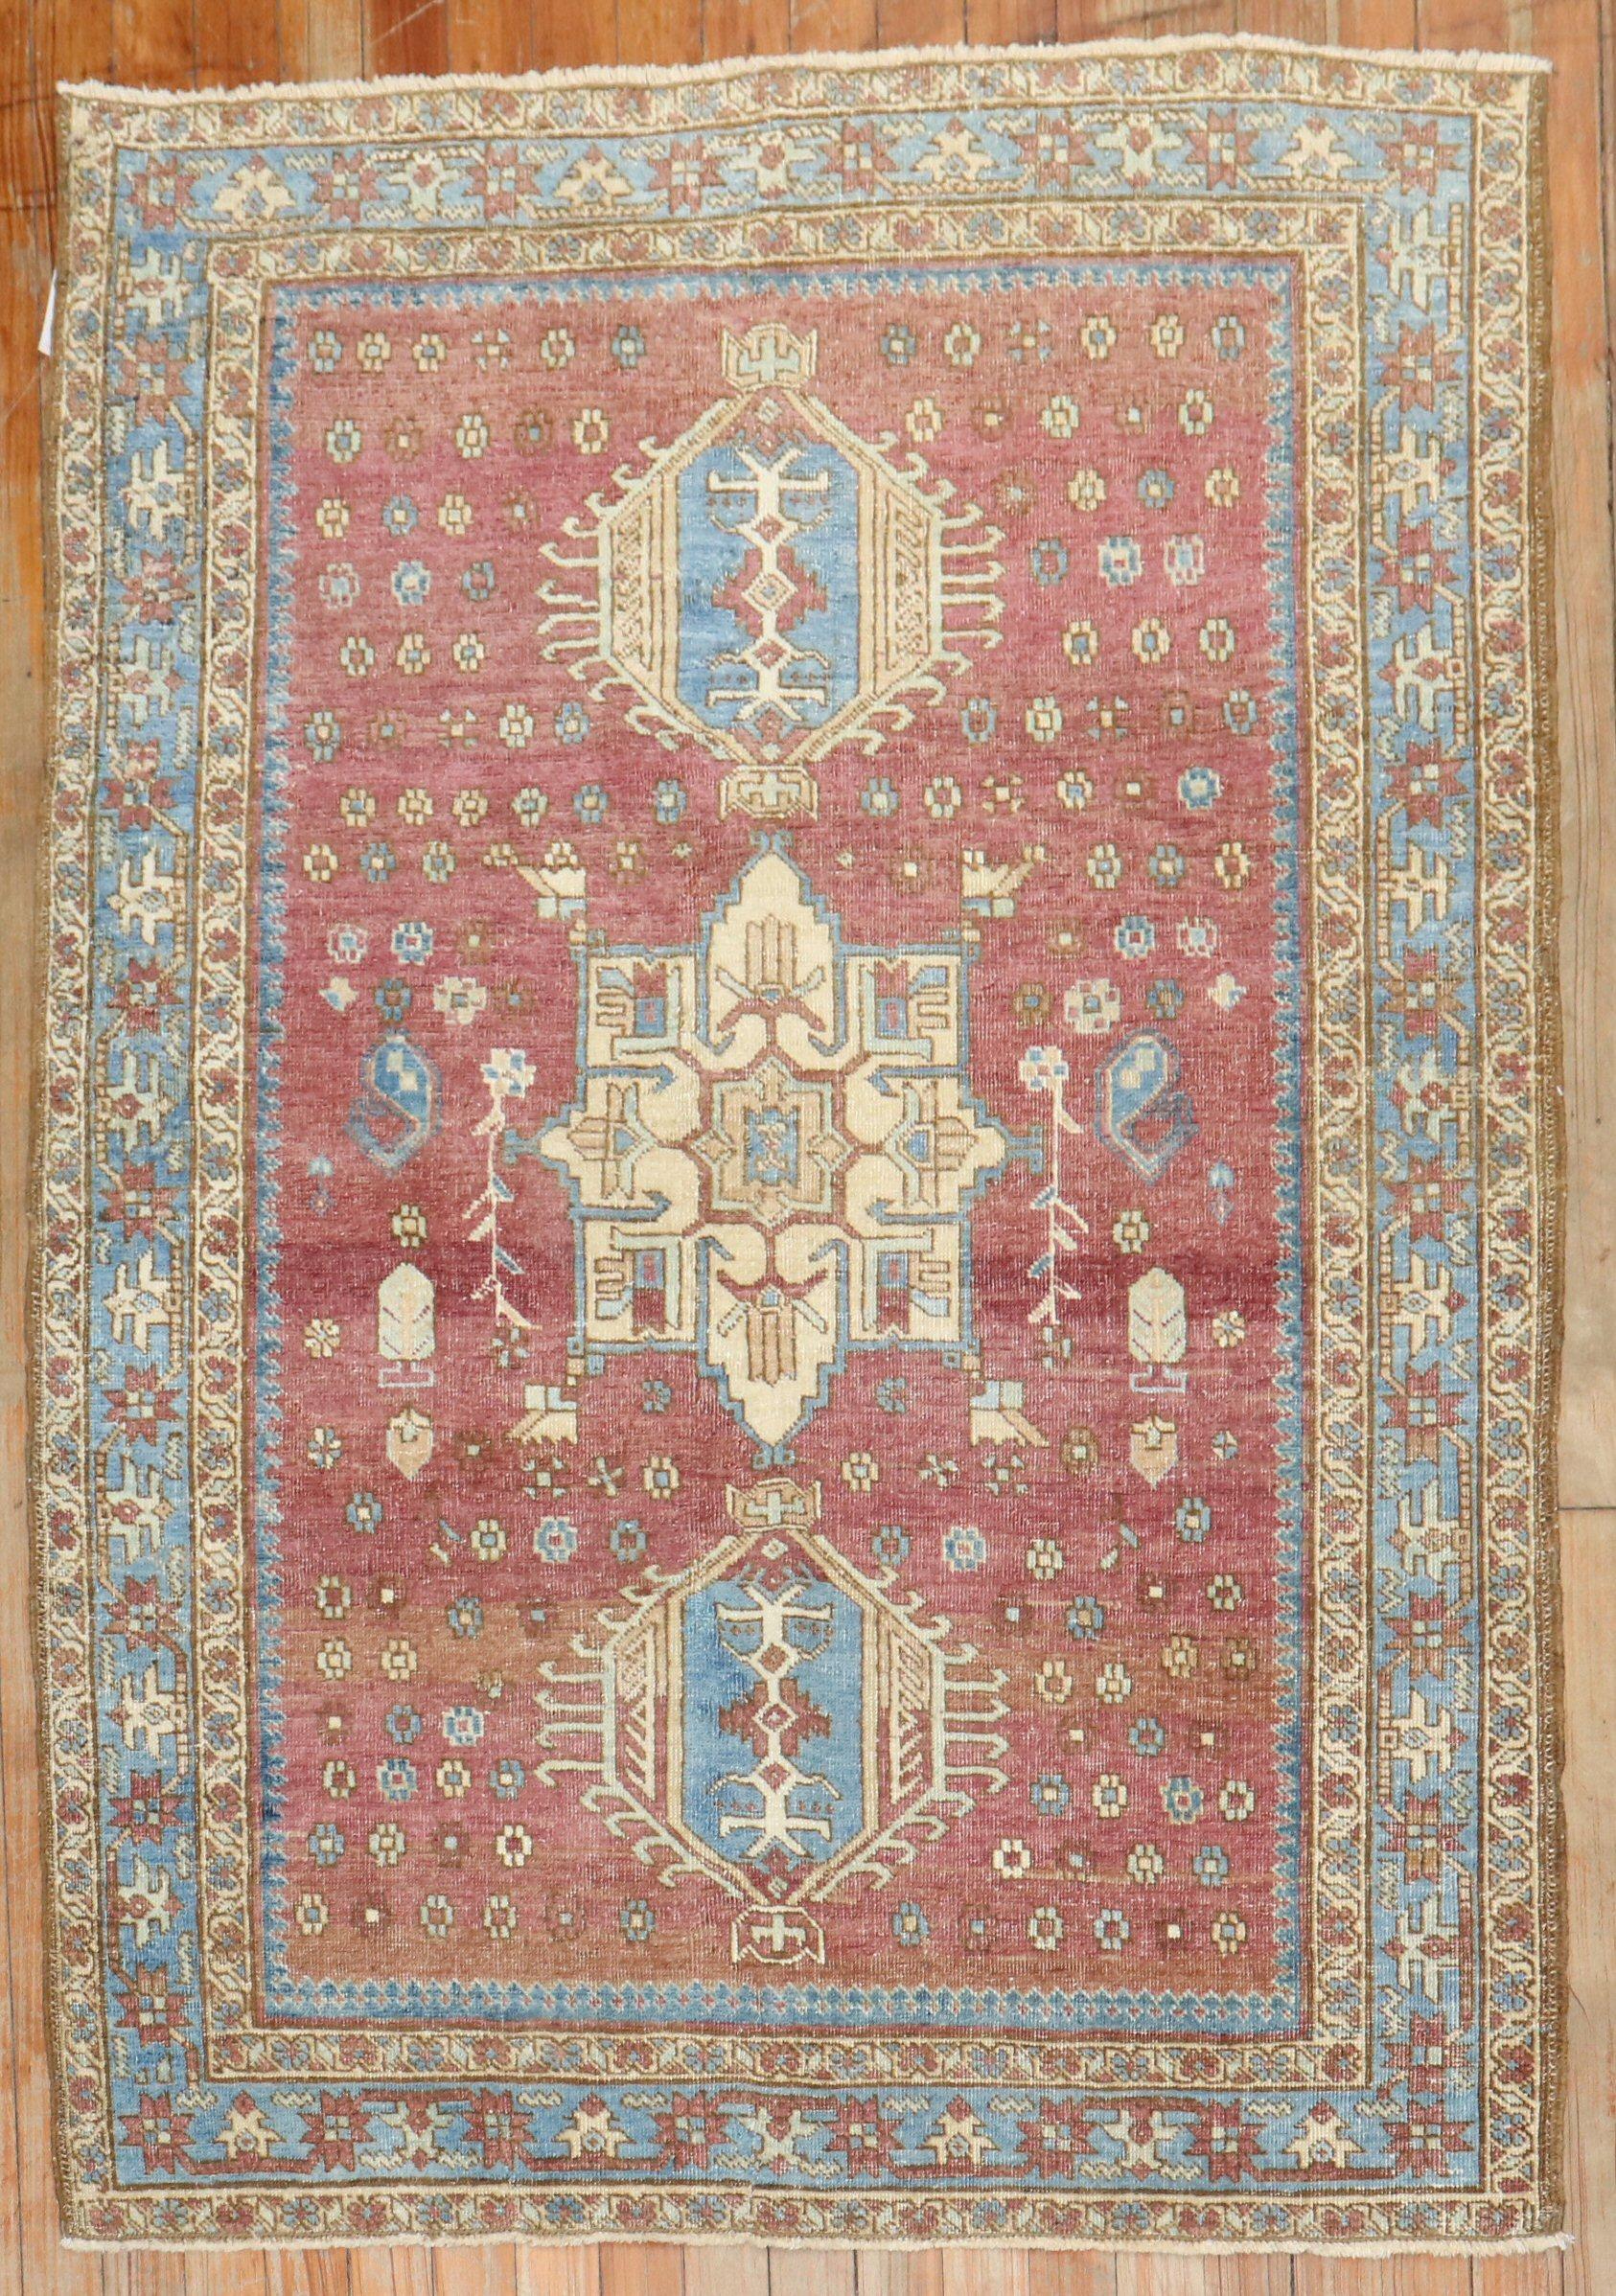 Persian Heriz Tribal scatter rug with a background color in rare aubergine from the 2nd quarter of the 20th century

Measures: 3'4” x 4'9”.